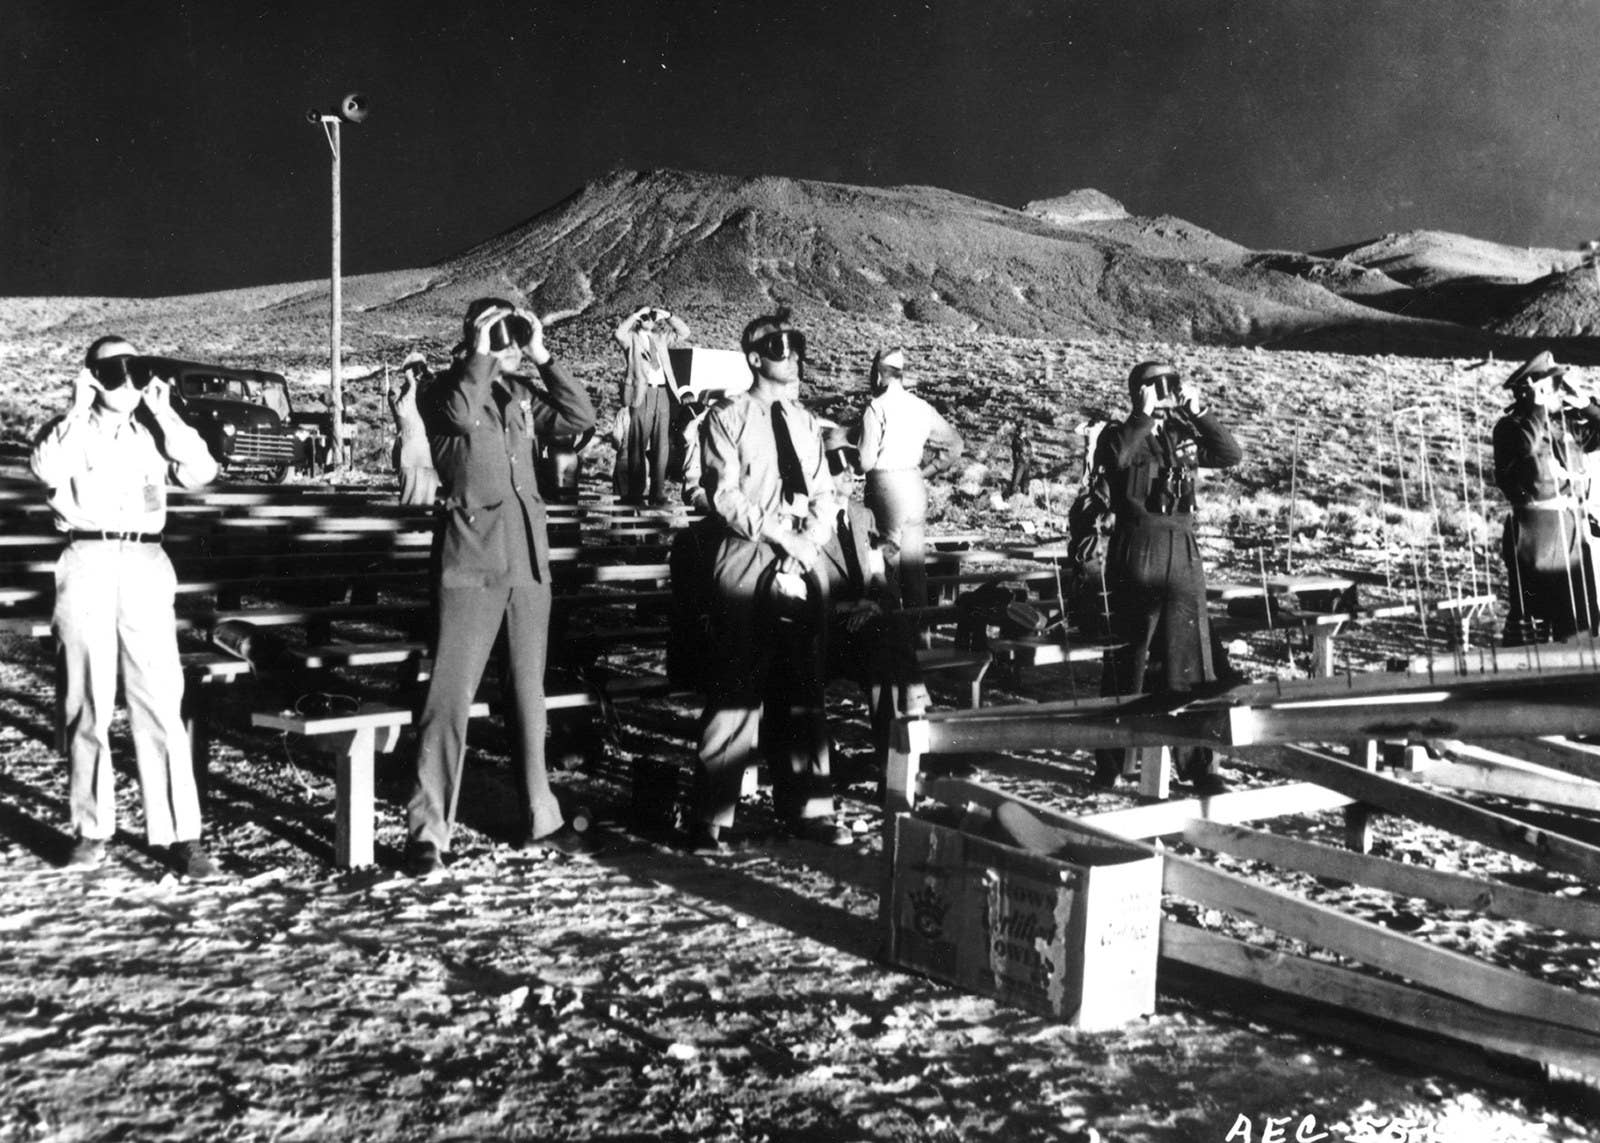 Observers wearing protective eyewear witness the detonation of nuclear artillery shell, codenamed 'Grable,' at the Nevada Proving Grounds on May 25, 1953. The long shadows are the result of the nuclear fireball. The shot was the 10th in a series of 11 nuclear detonations conducted in Operation Upshot–Knothole and marked the first time a nuclear device had been fired from a cannon.